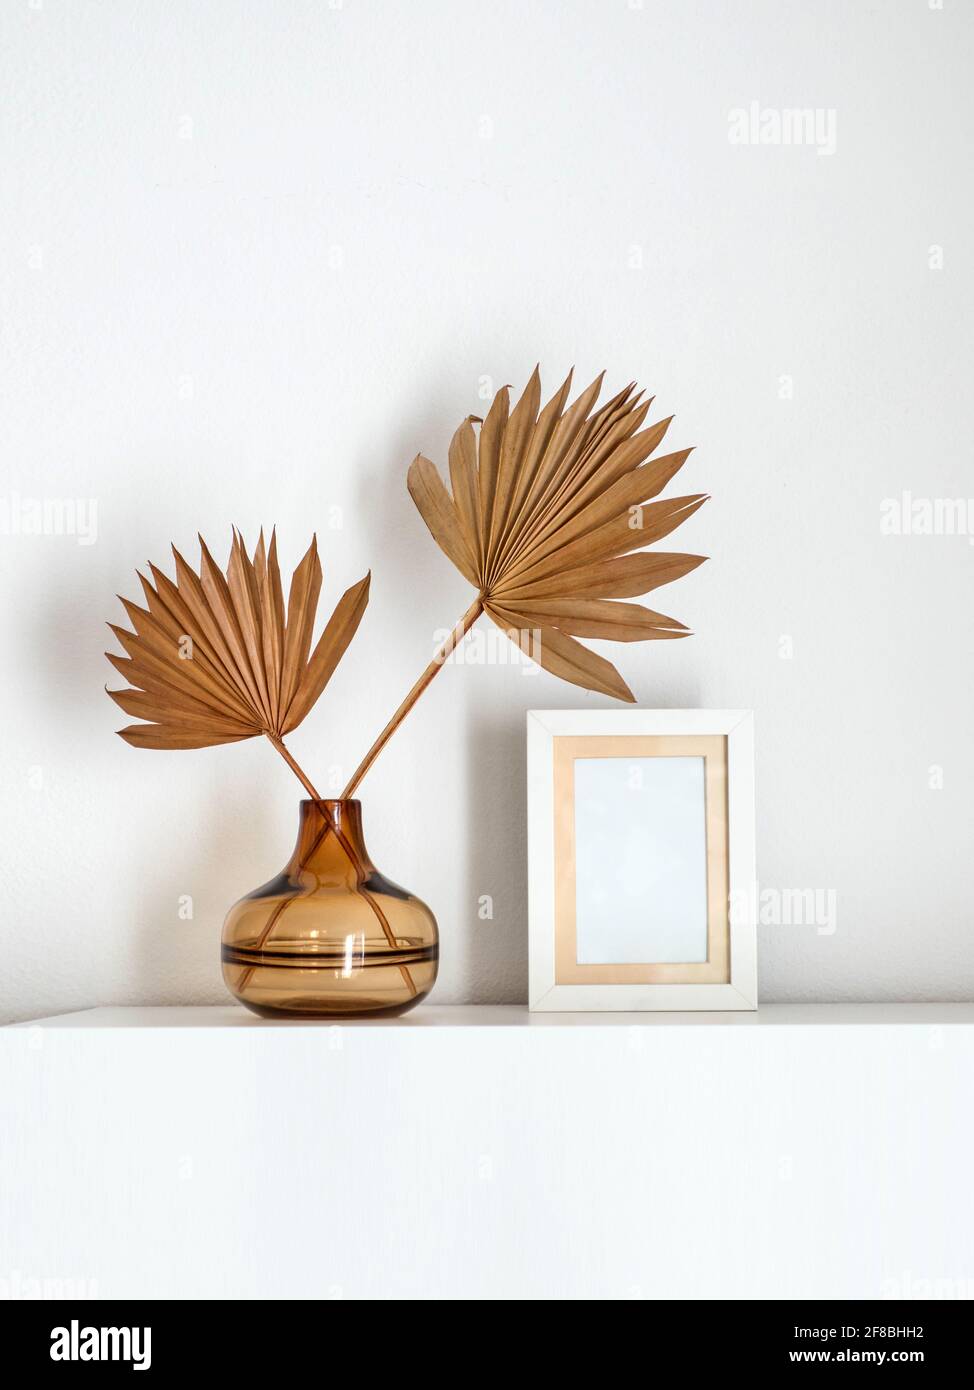 Empty white photo frame next to a glass vase with dried palm leaves. Stock Photo